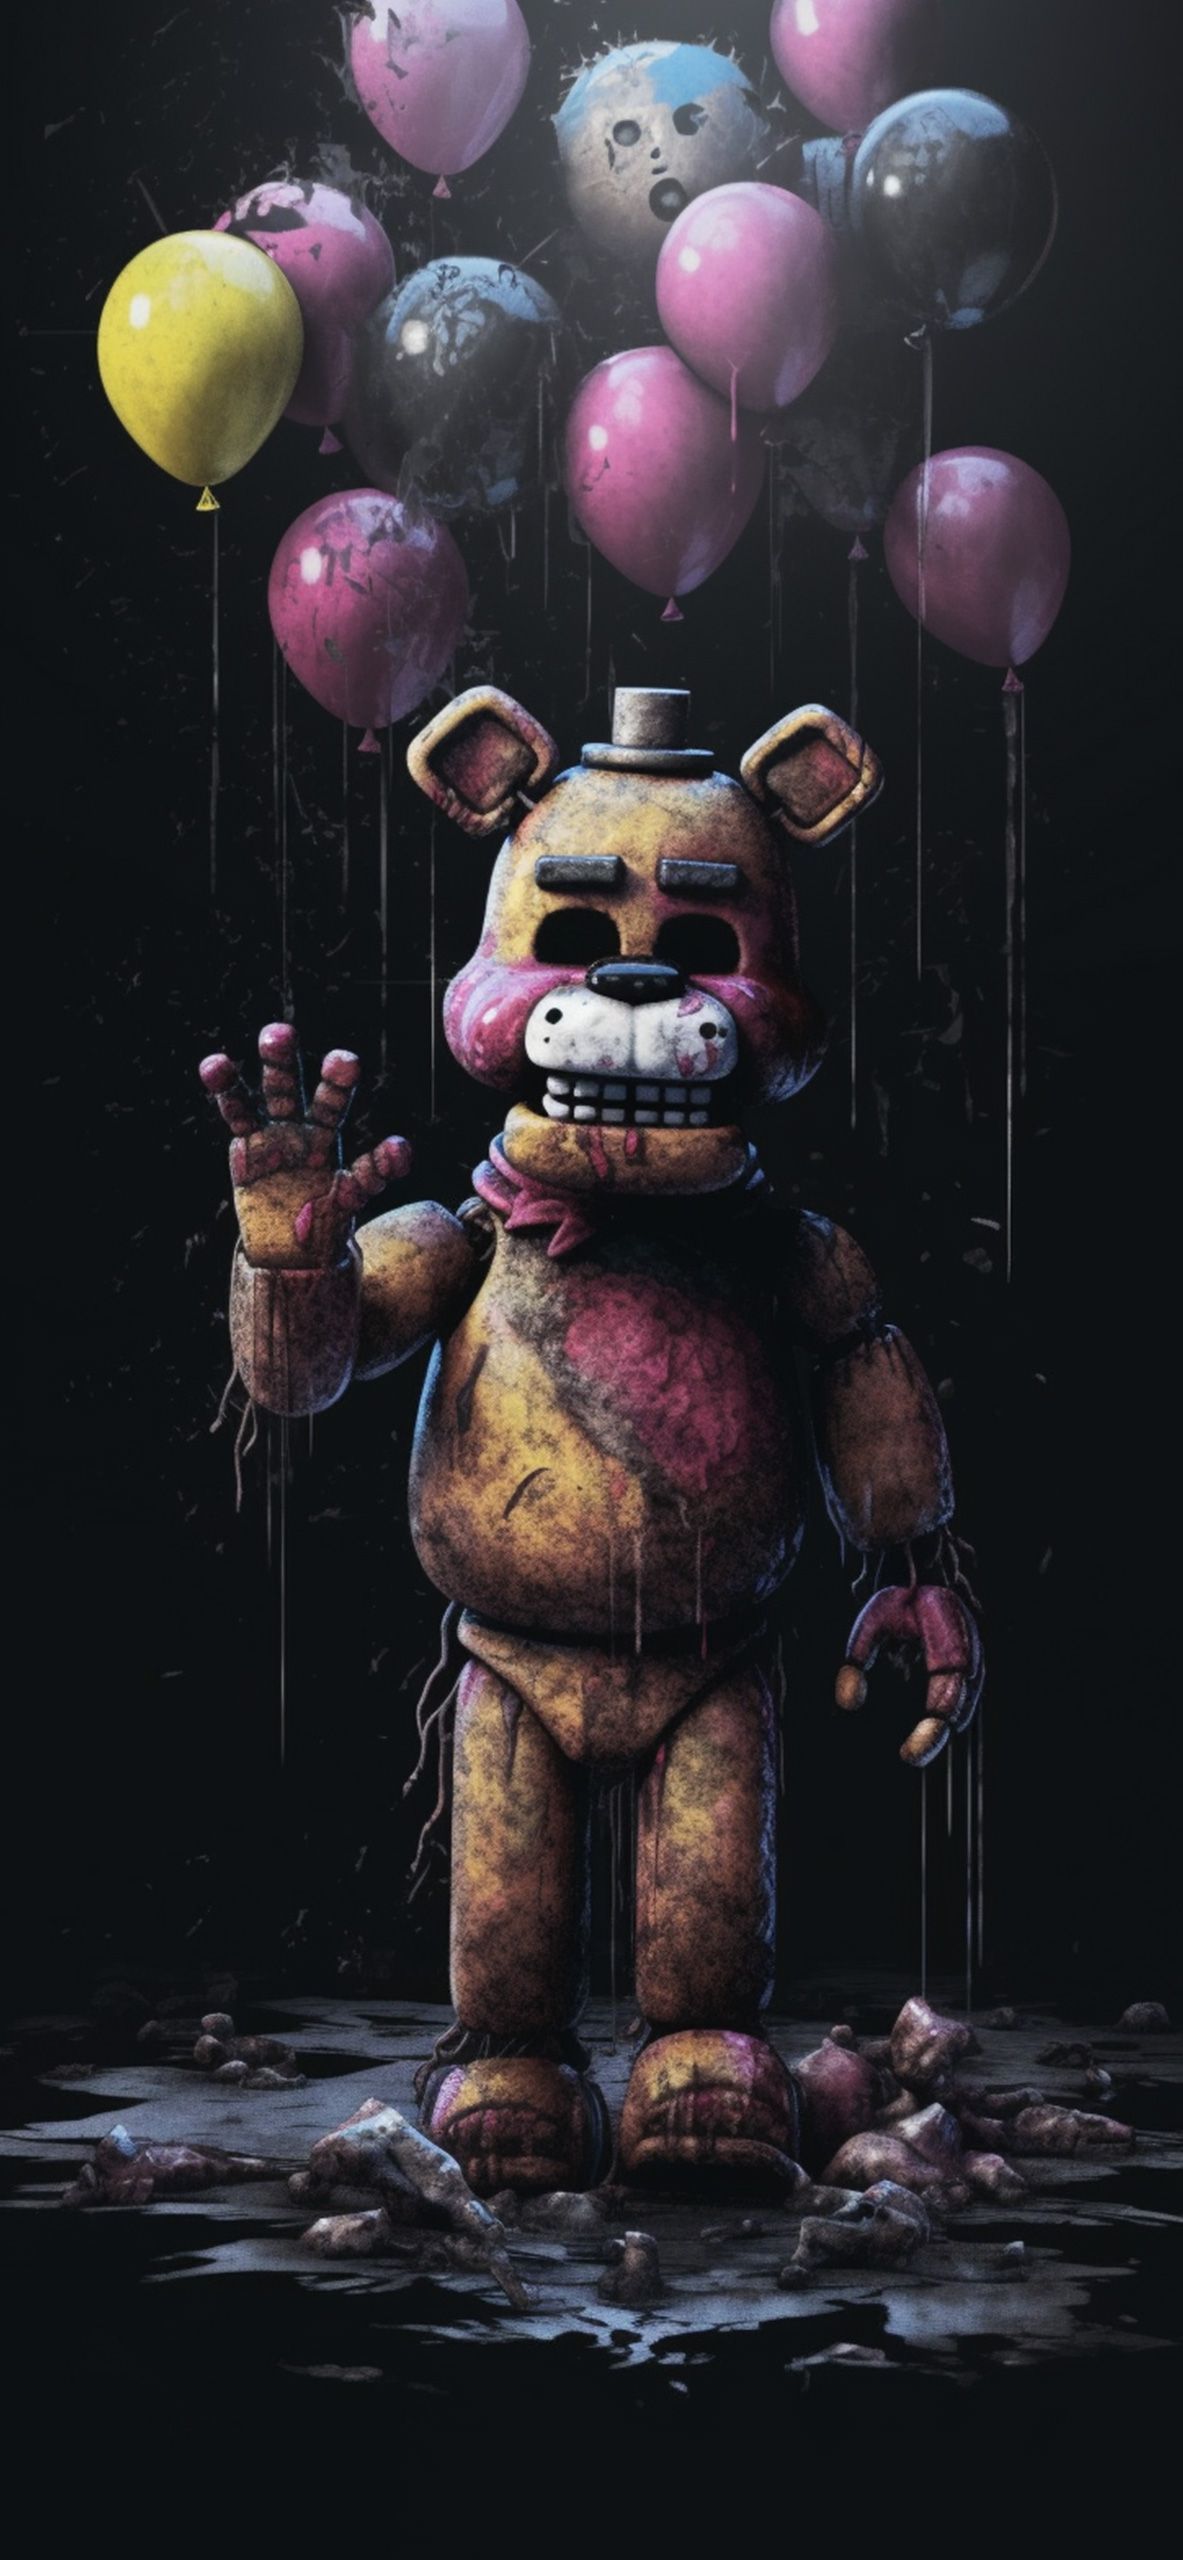 A very cool Five Nights at Freddy's wallpaper I found. - Balloons, creepy